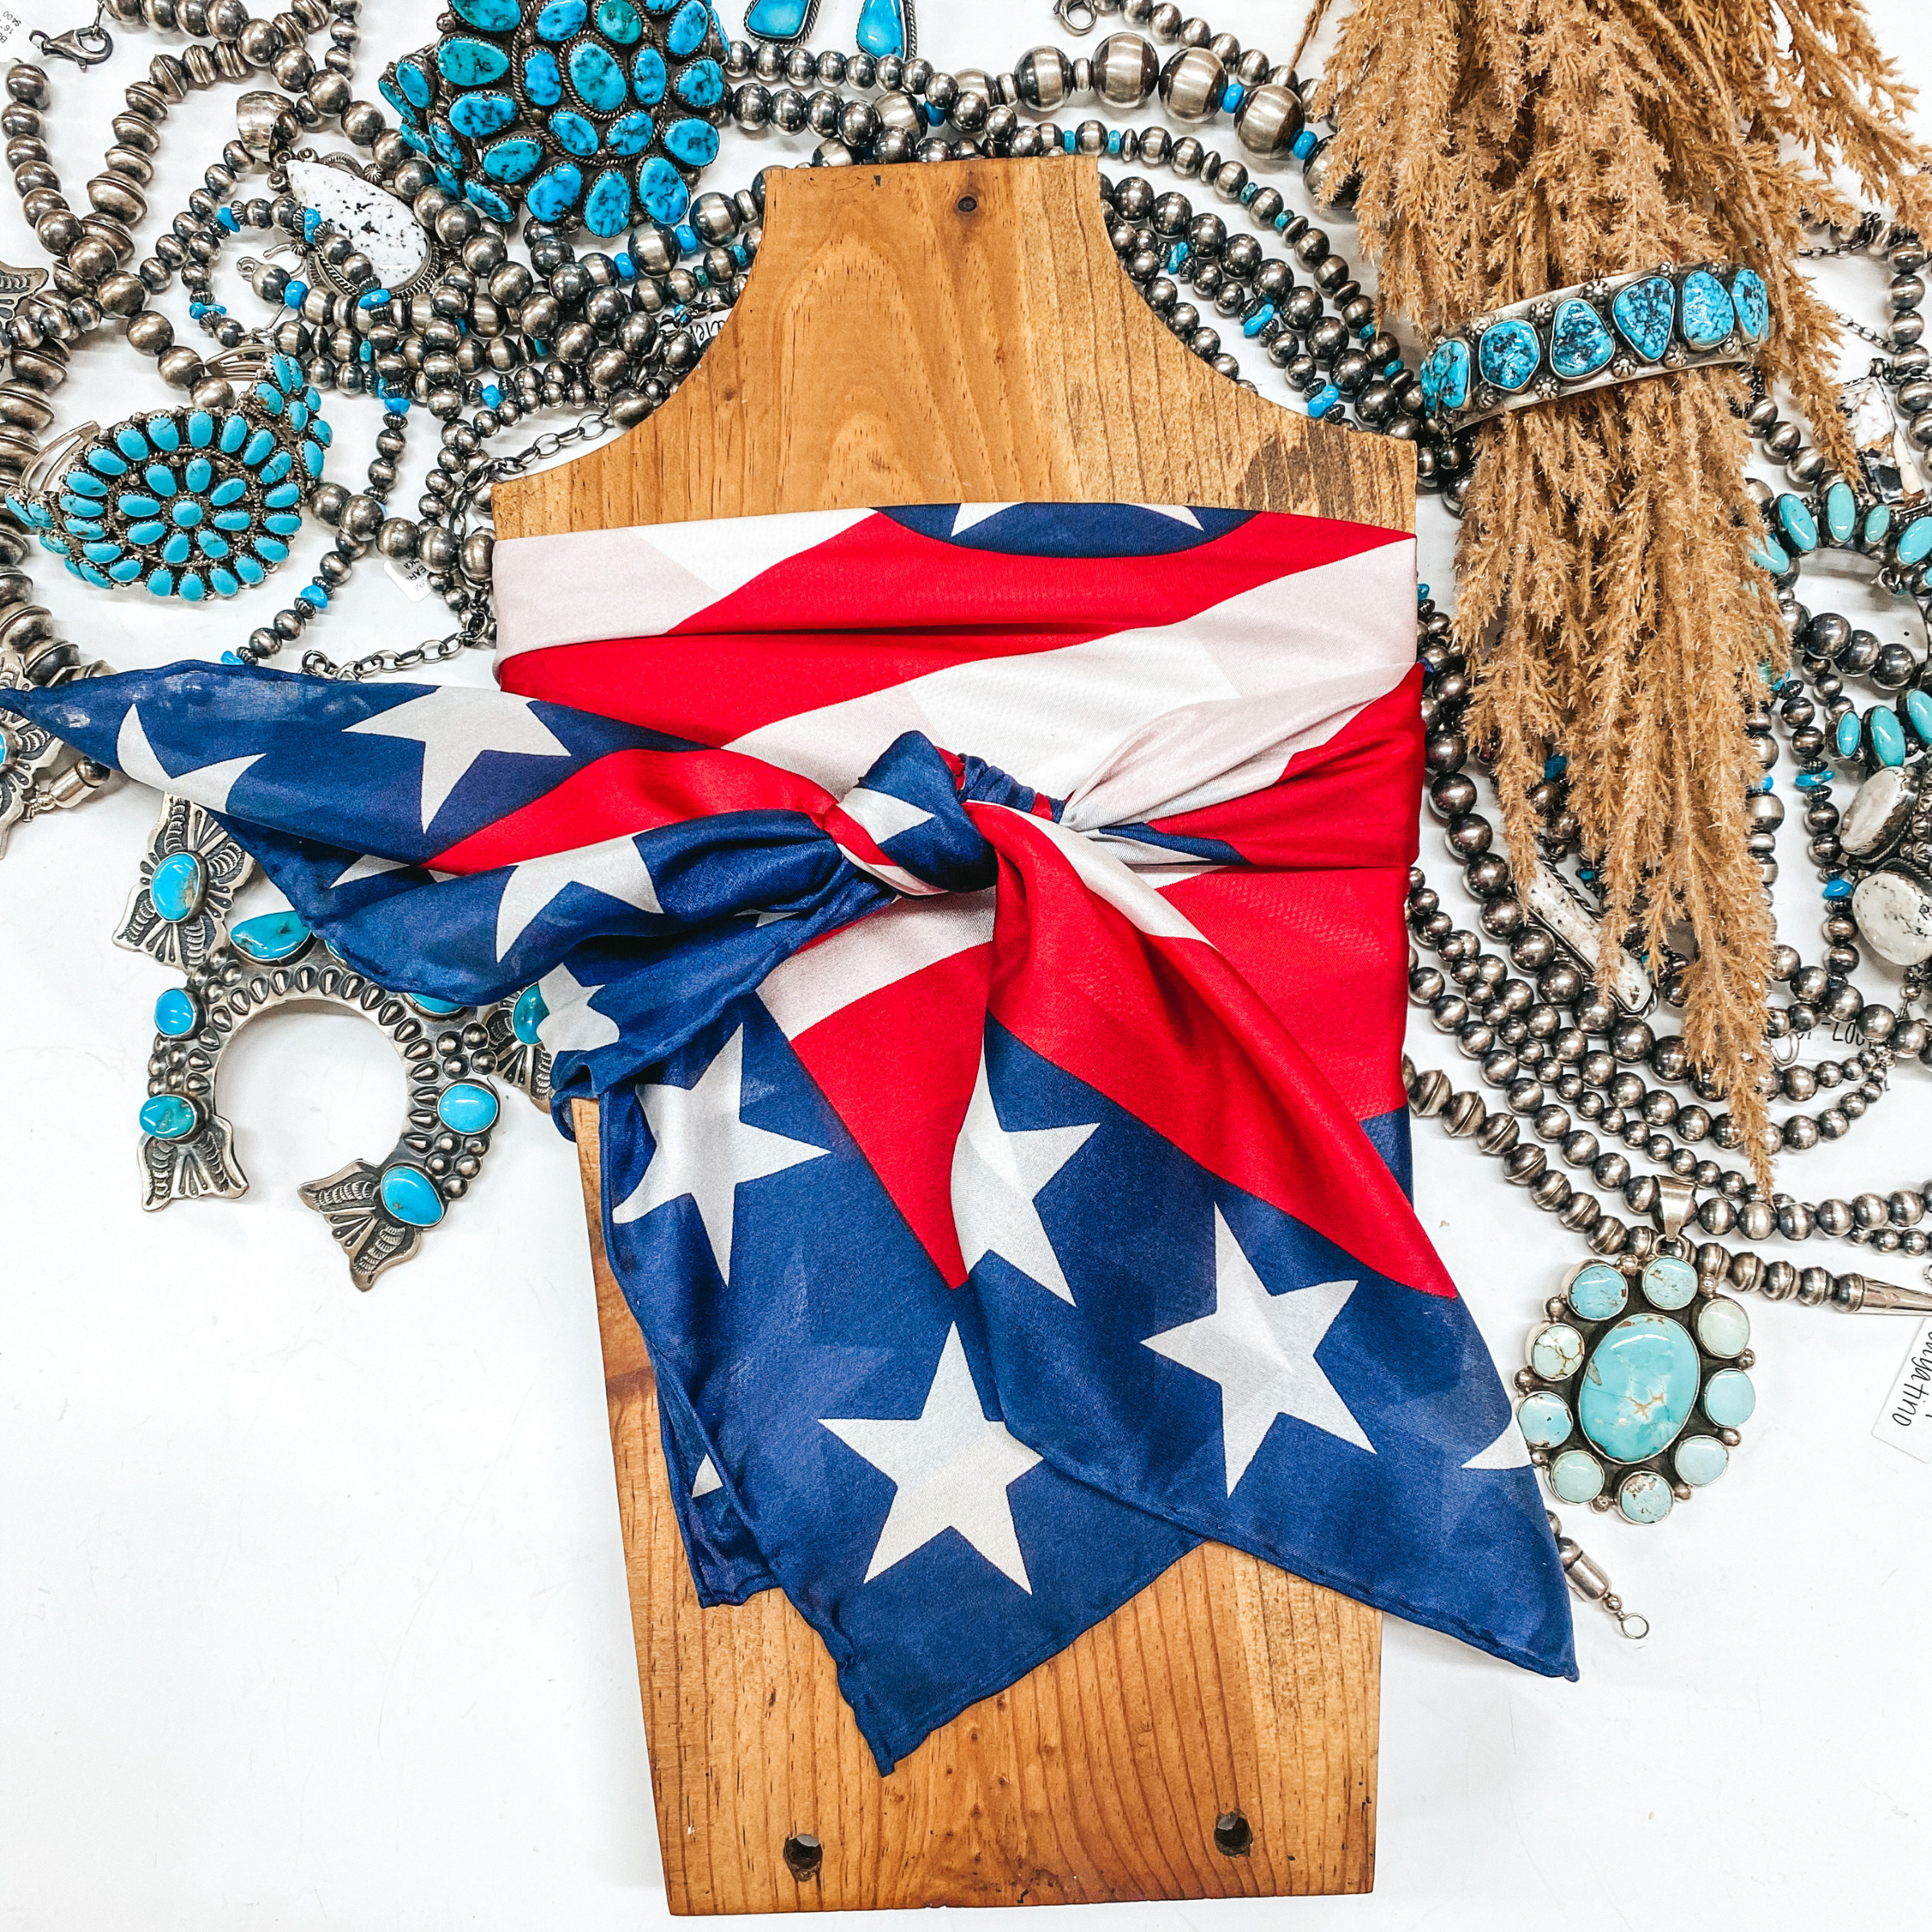 Liberty Wild Rag in Red, White, and Blue - Giddy Up Glamour Boutique